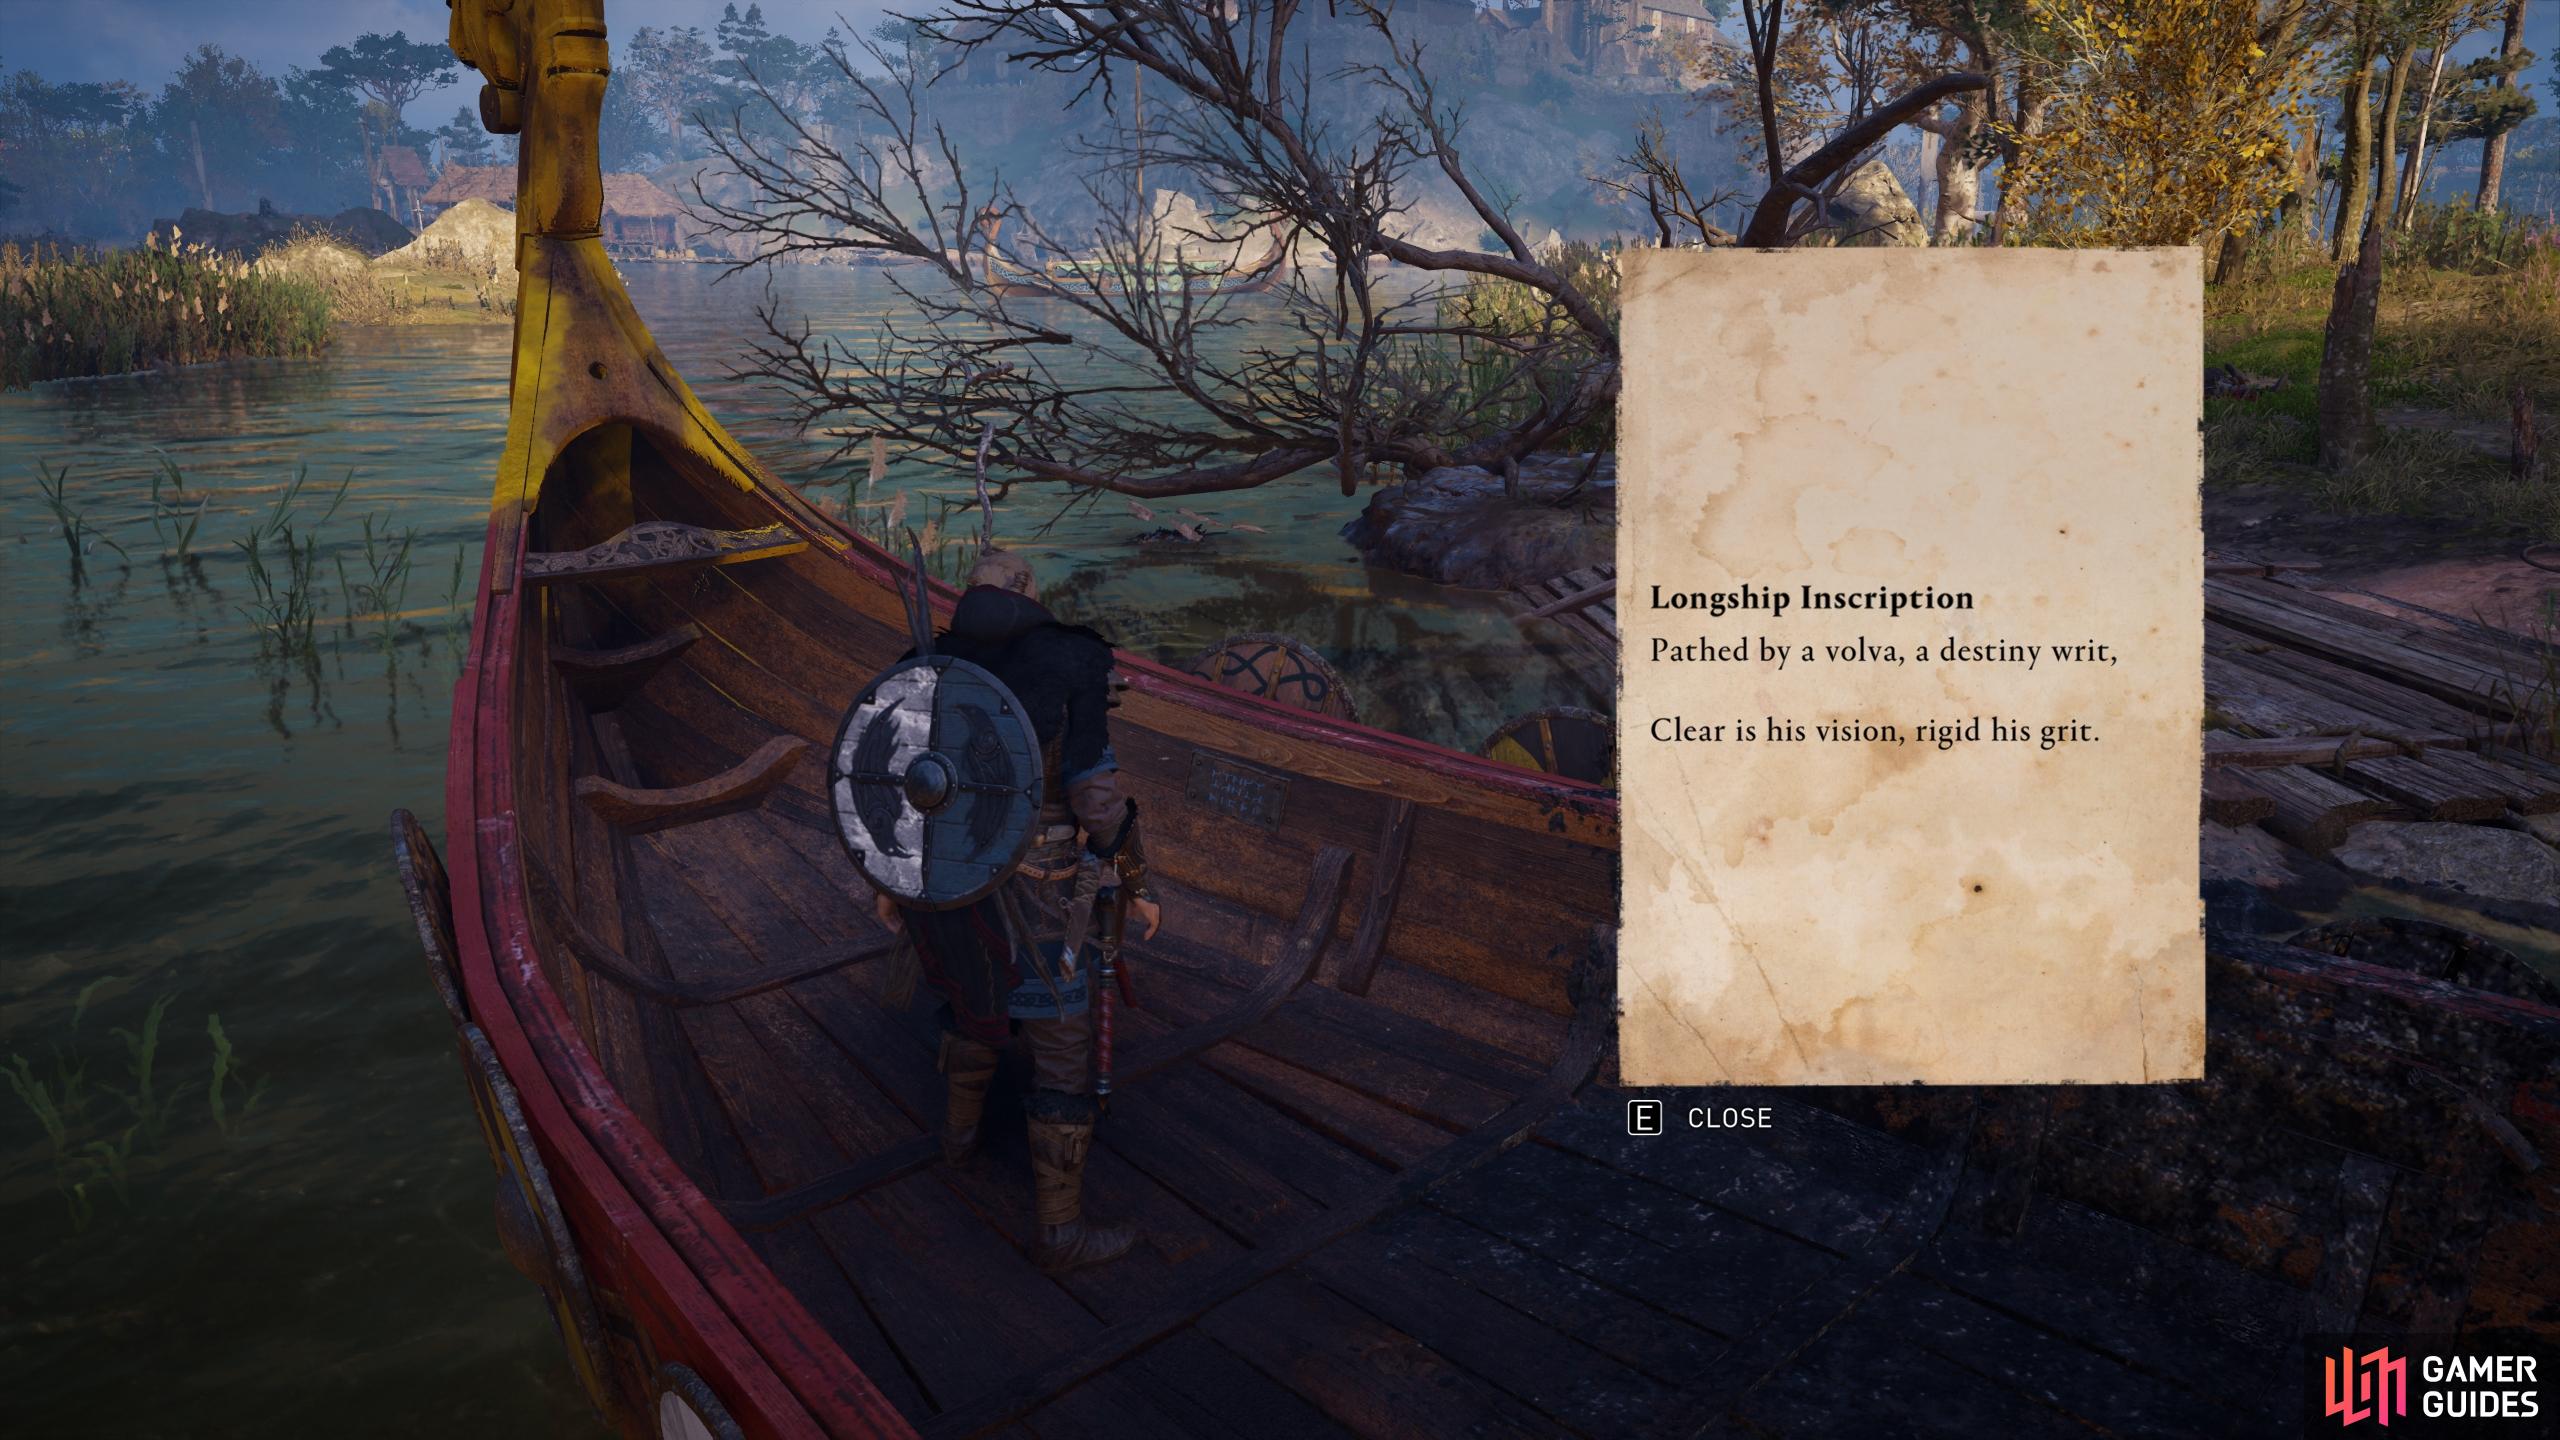 Read the inscription on the inside of the longship's hull.